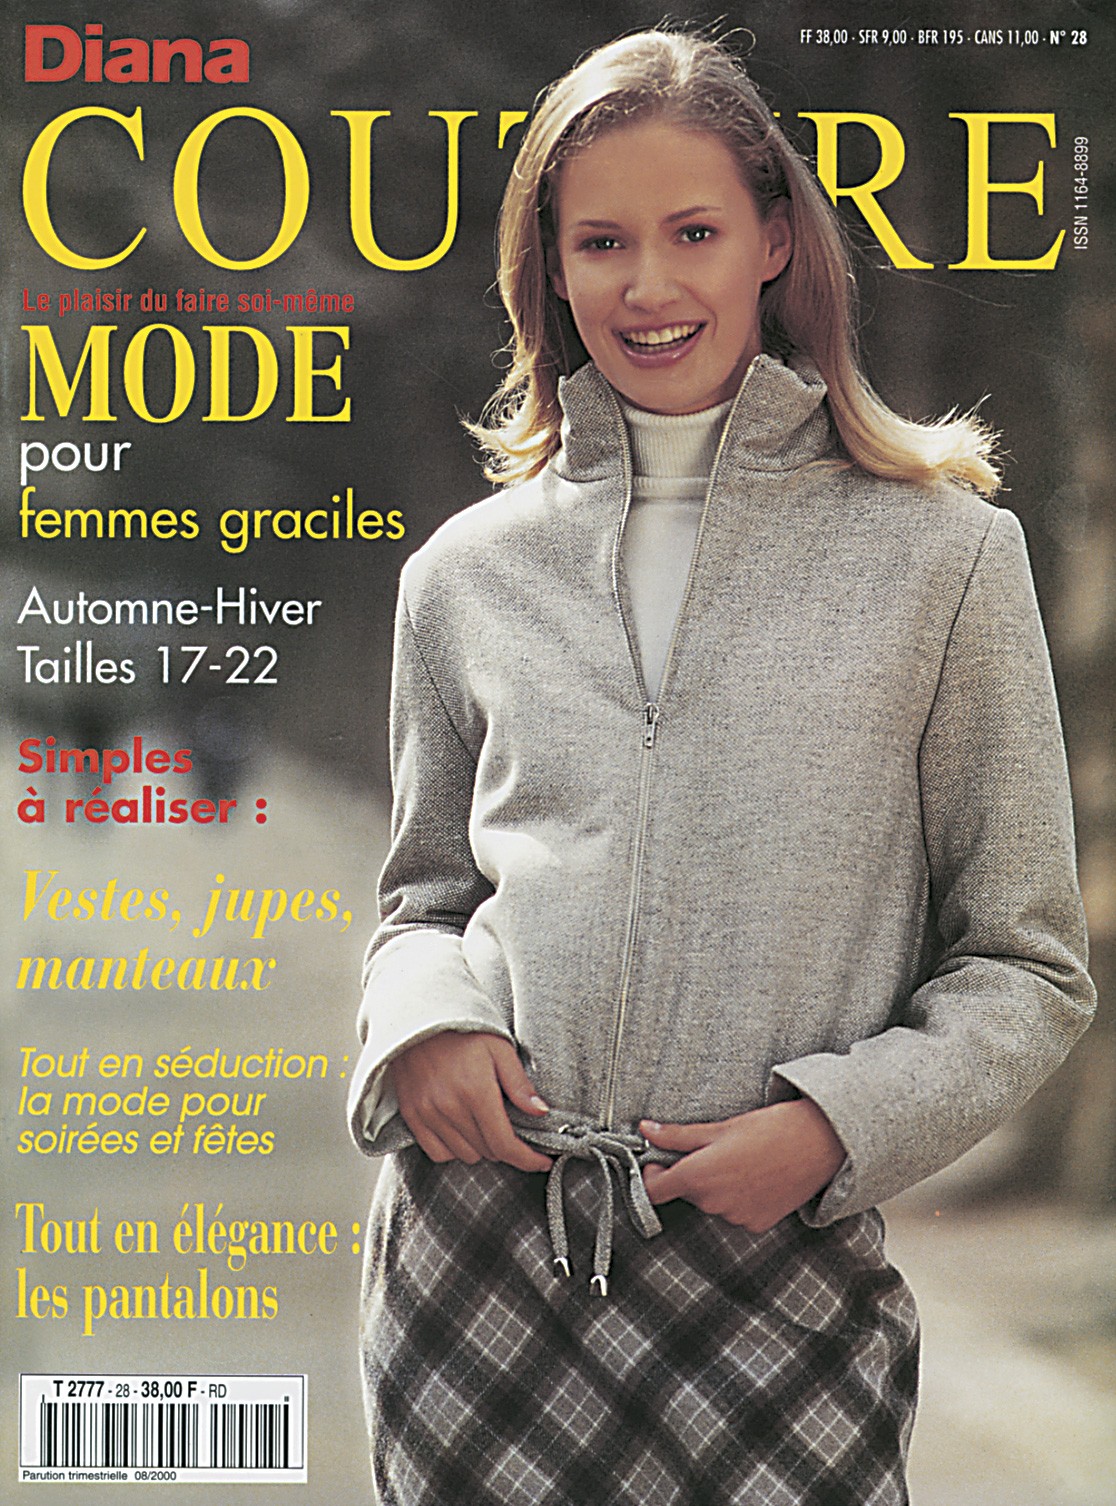 Diana Couture N°28 Automne-Hiver